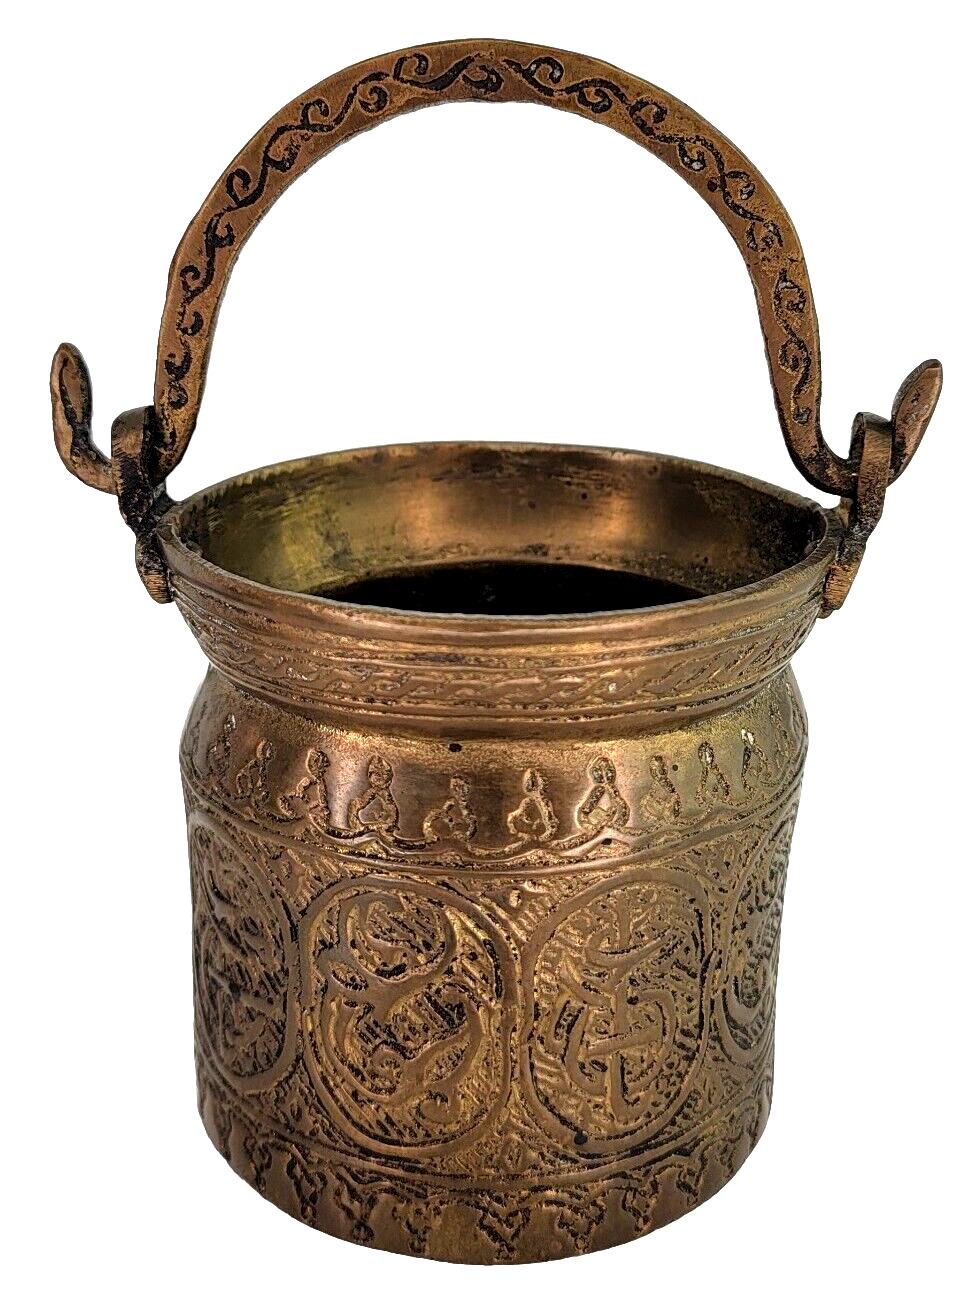 Antique Handmade Tooled Engraved Etched Solid Brass Middle Eastern Pot Bucket